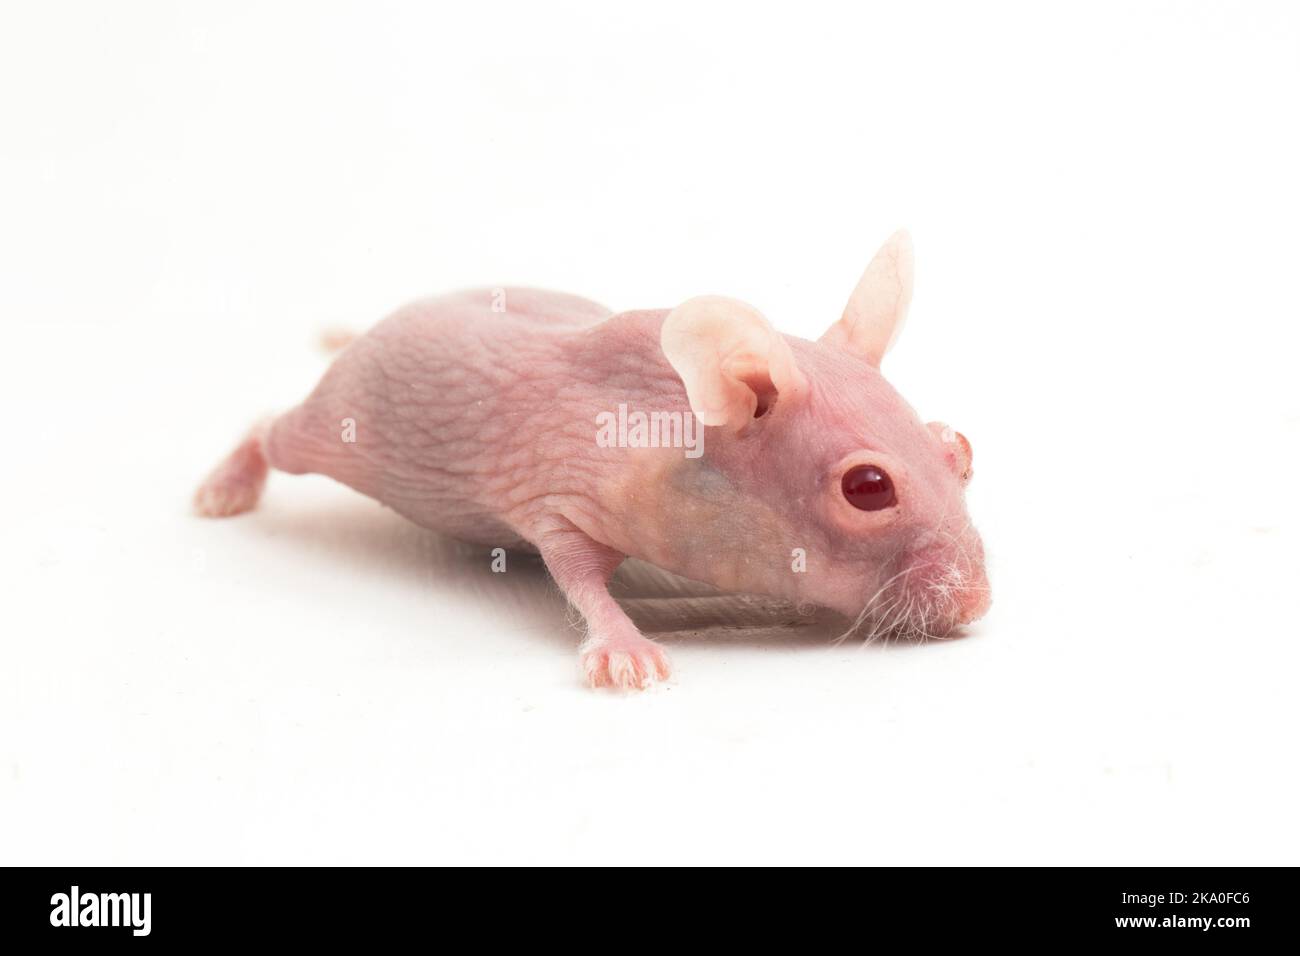 Cute dwarf Hairless hamster isolated on white background Stock Photo